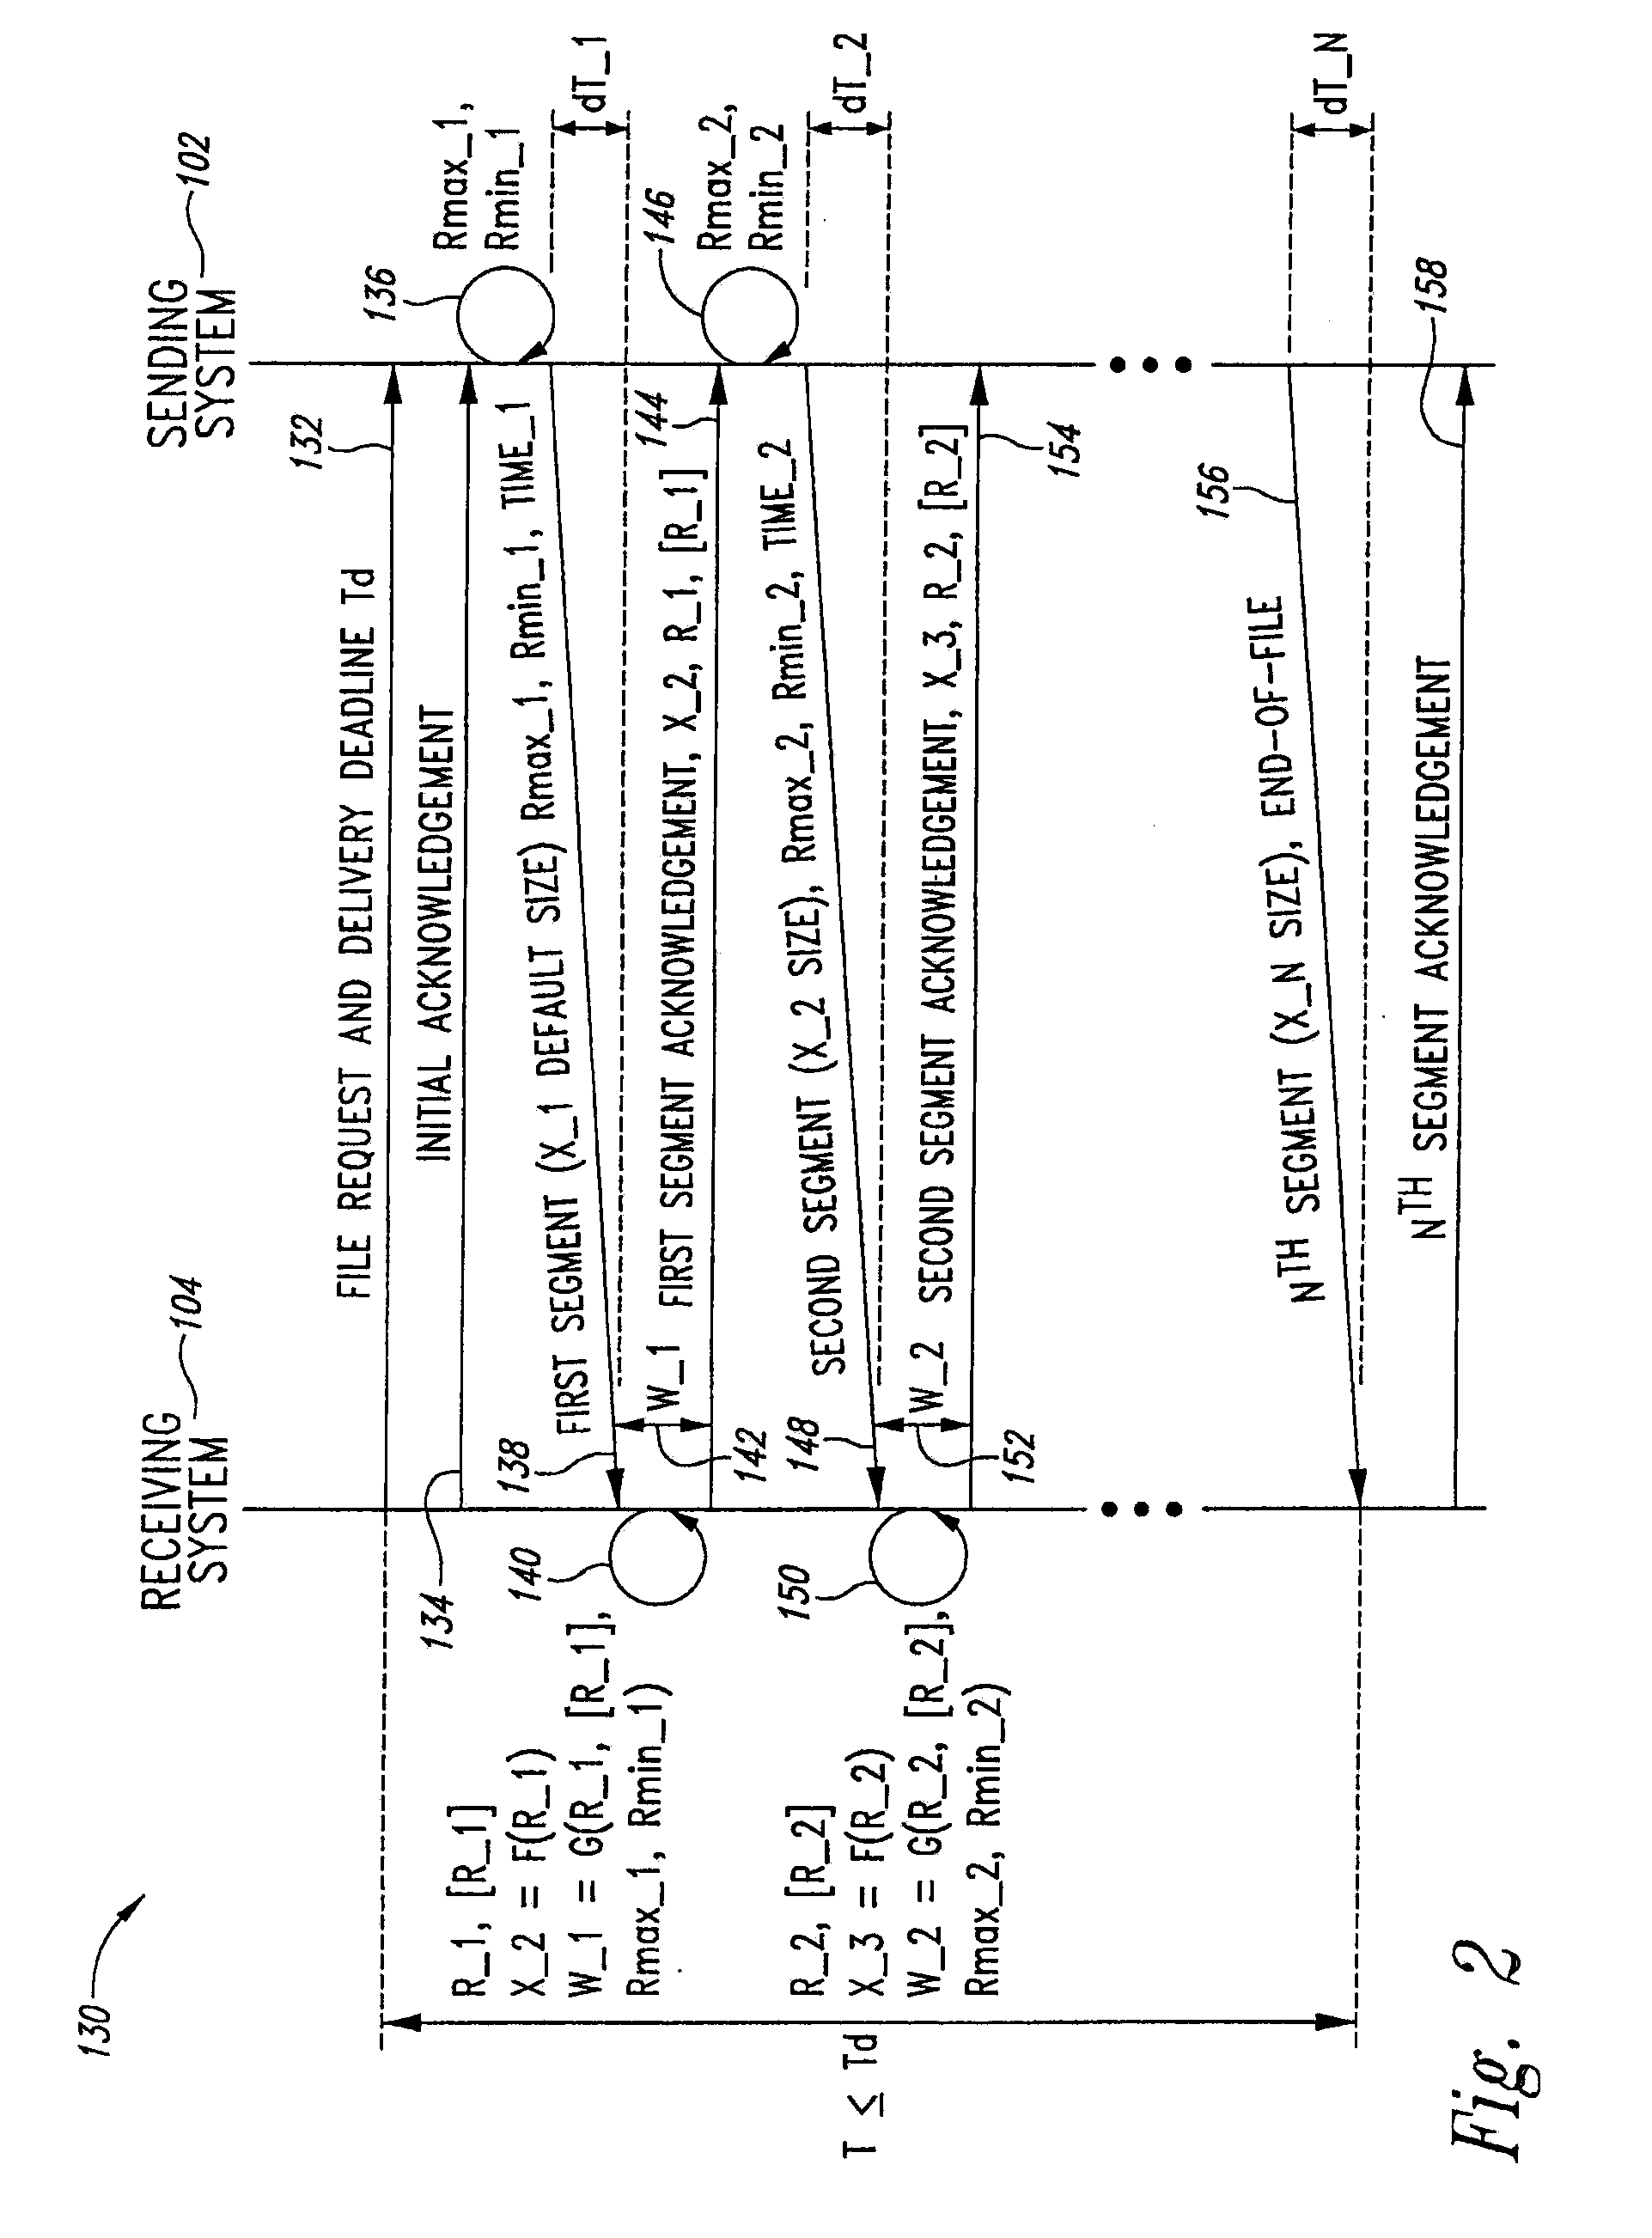 Adaptive file delivery with transparency capability system and method